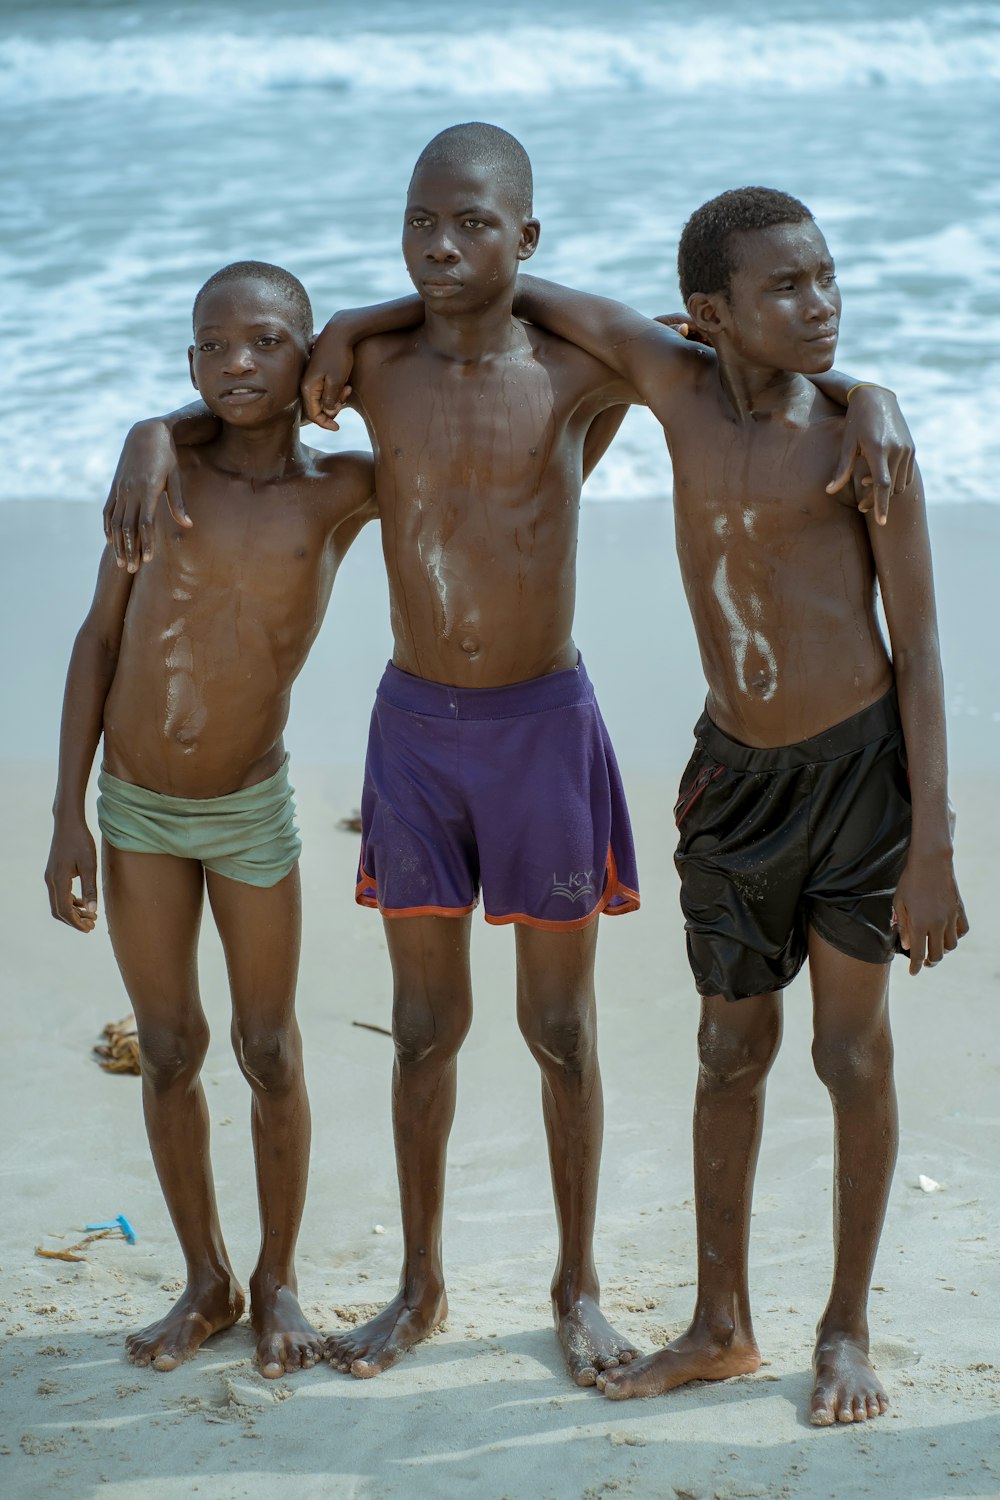 a group of three boys standing next to each other on a beach